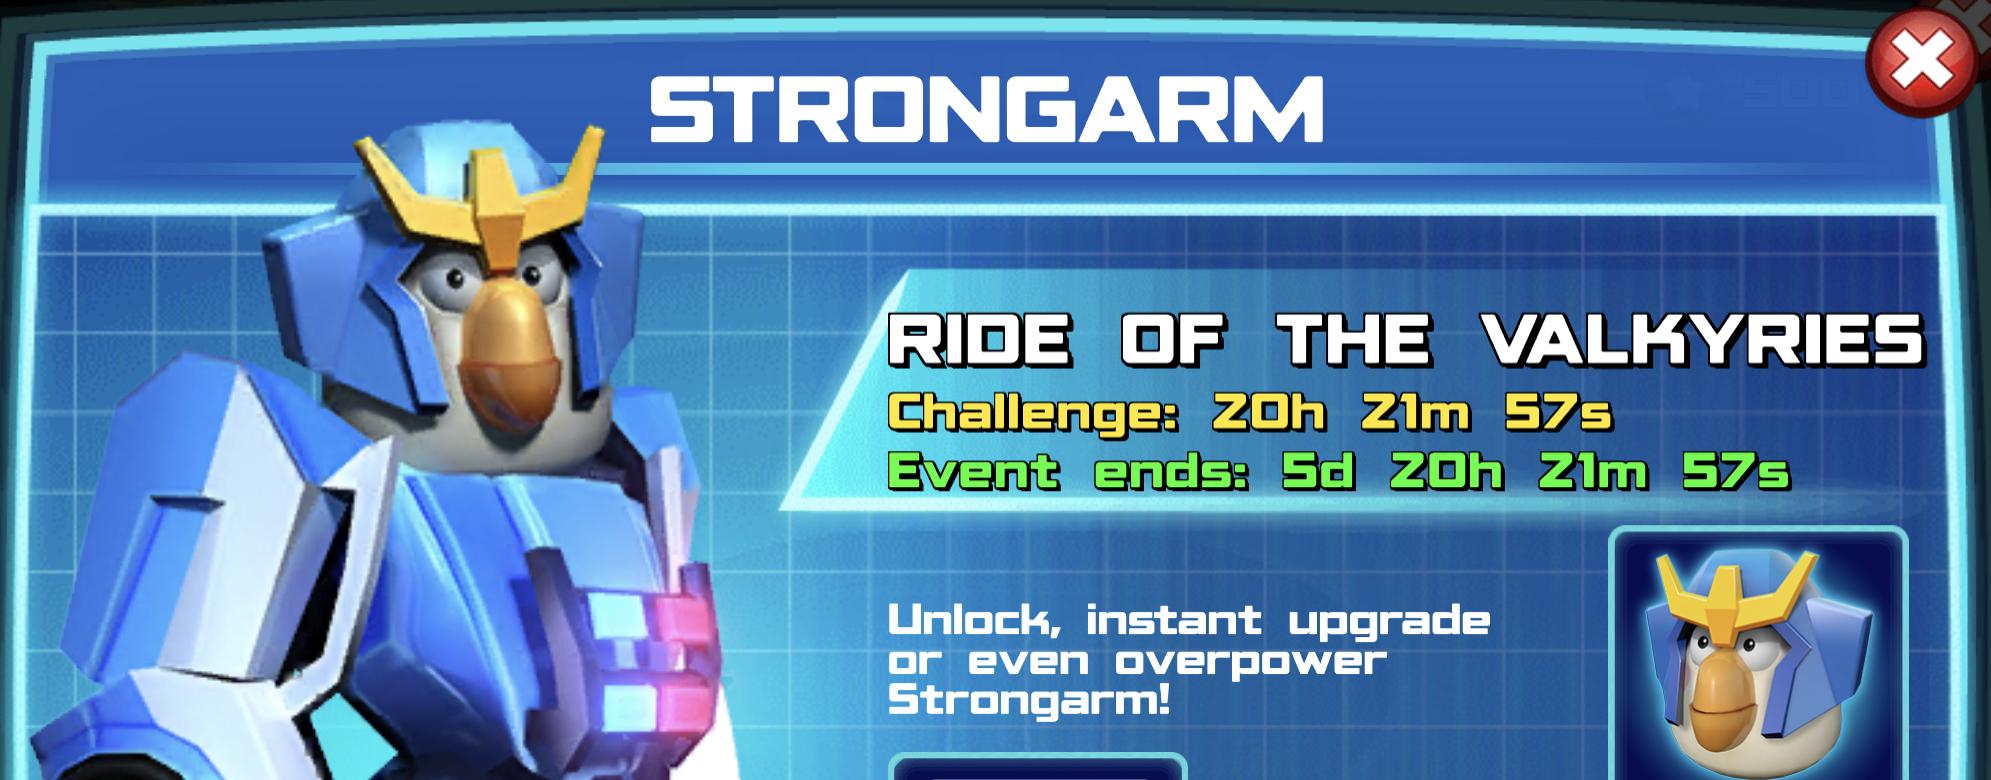 The event banner for Strongarm – Ride of the Valkyries